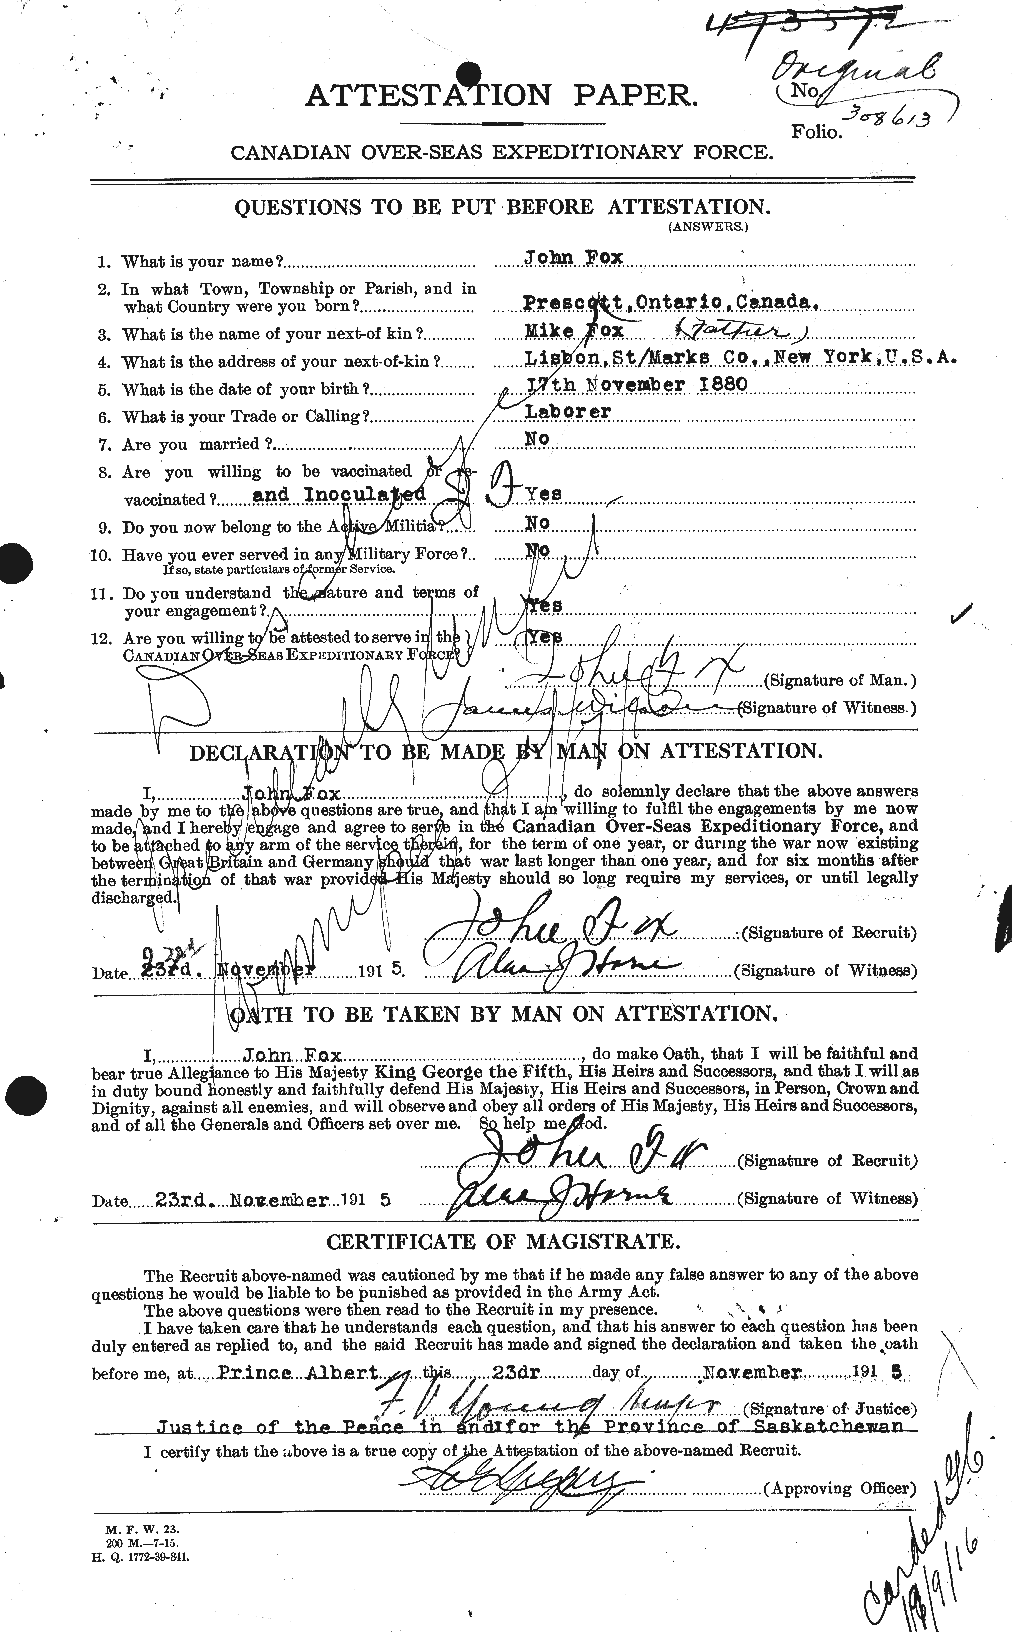 Personnel Records of the First World War - CEF 333482a